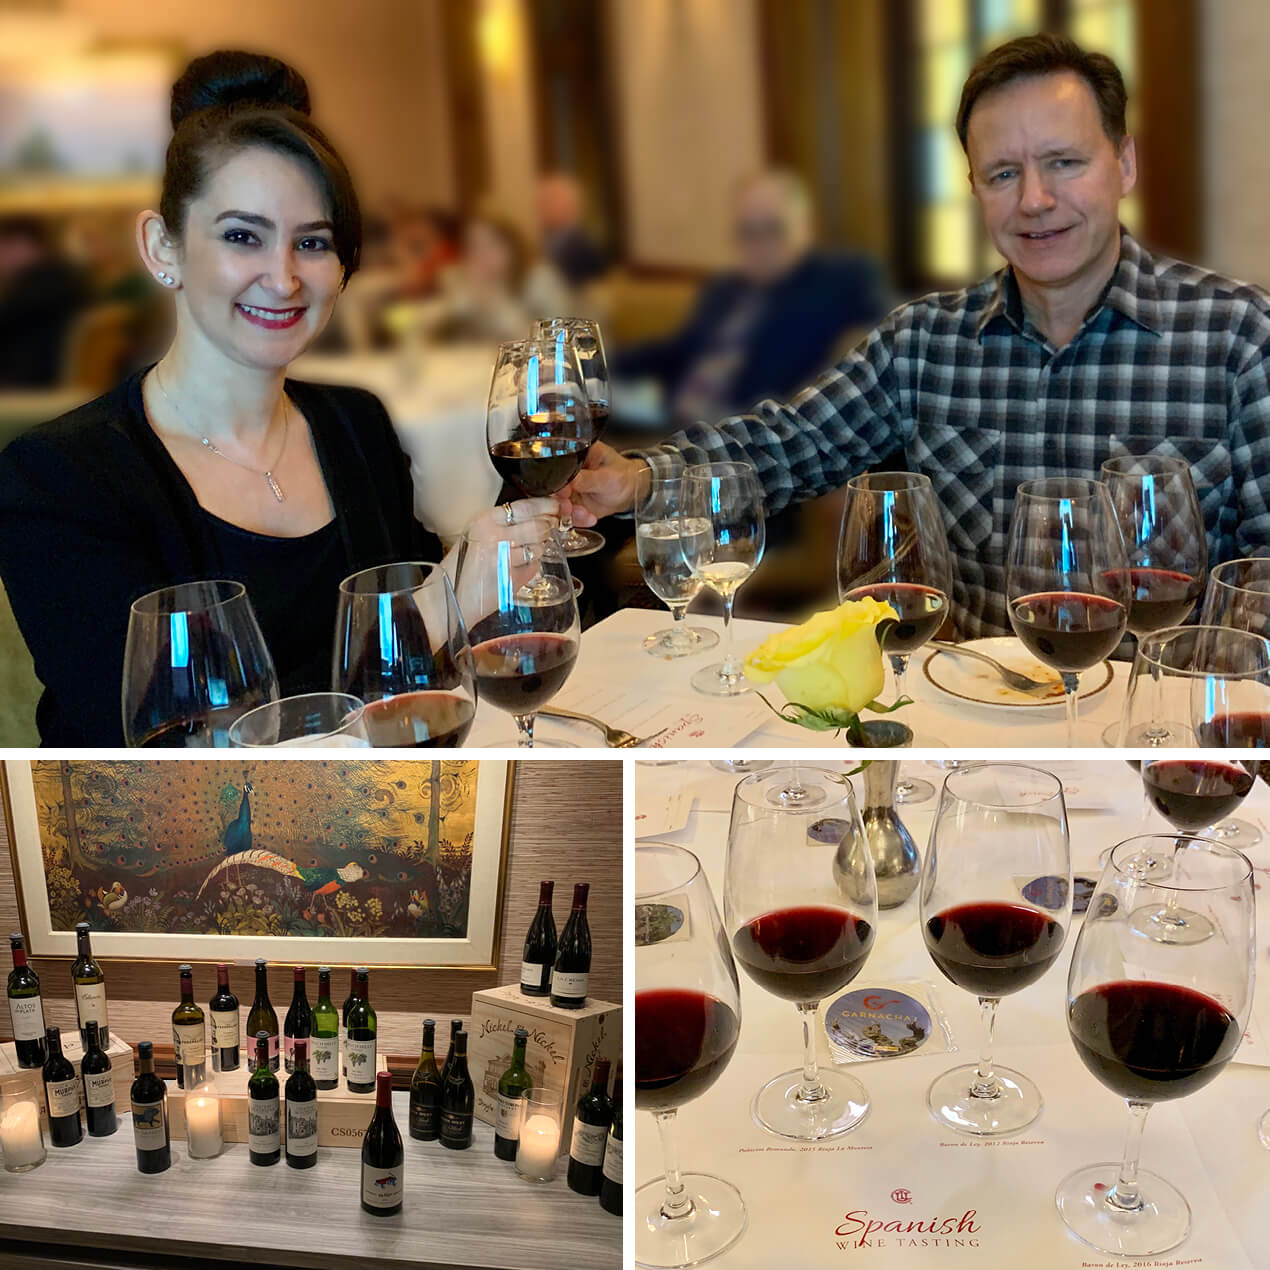 Richard Gurak and Michele Katz celebrating Advitam IP’s seventh anniversary at a wine tasting featuring a variety of flavorful Spanish wines